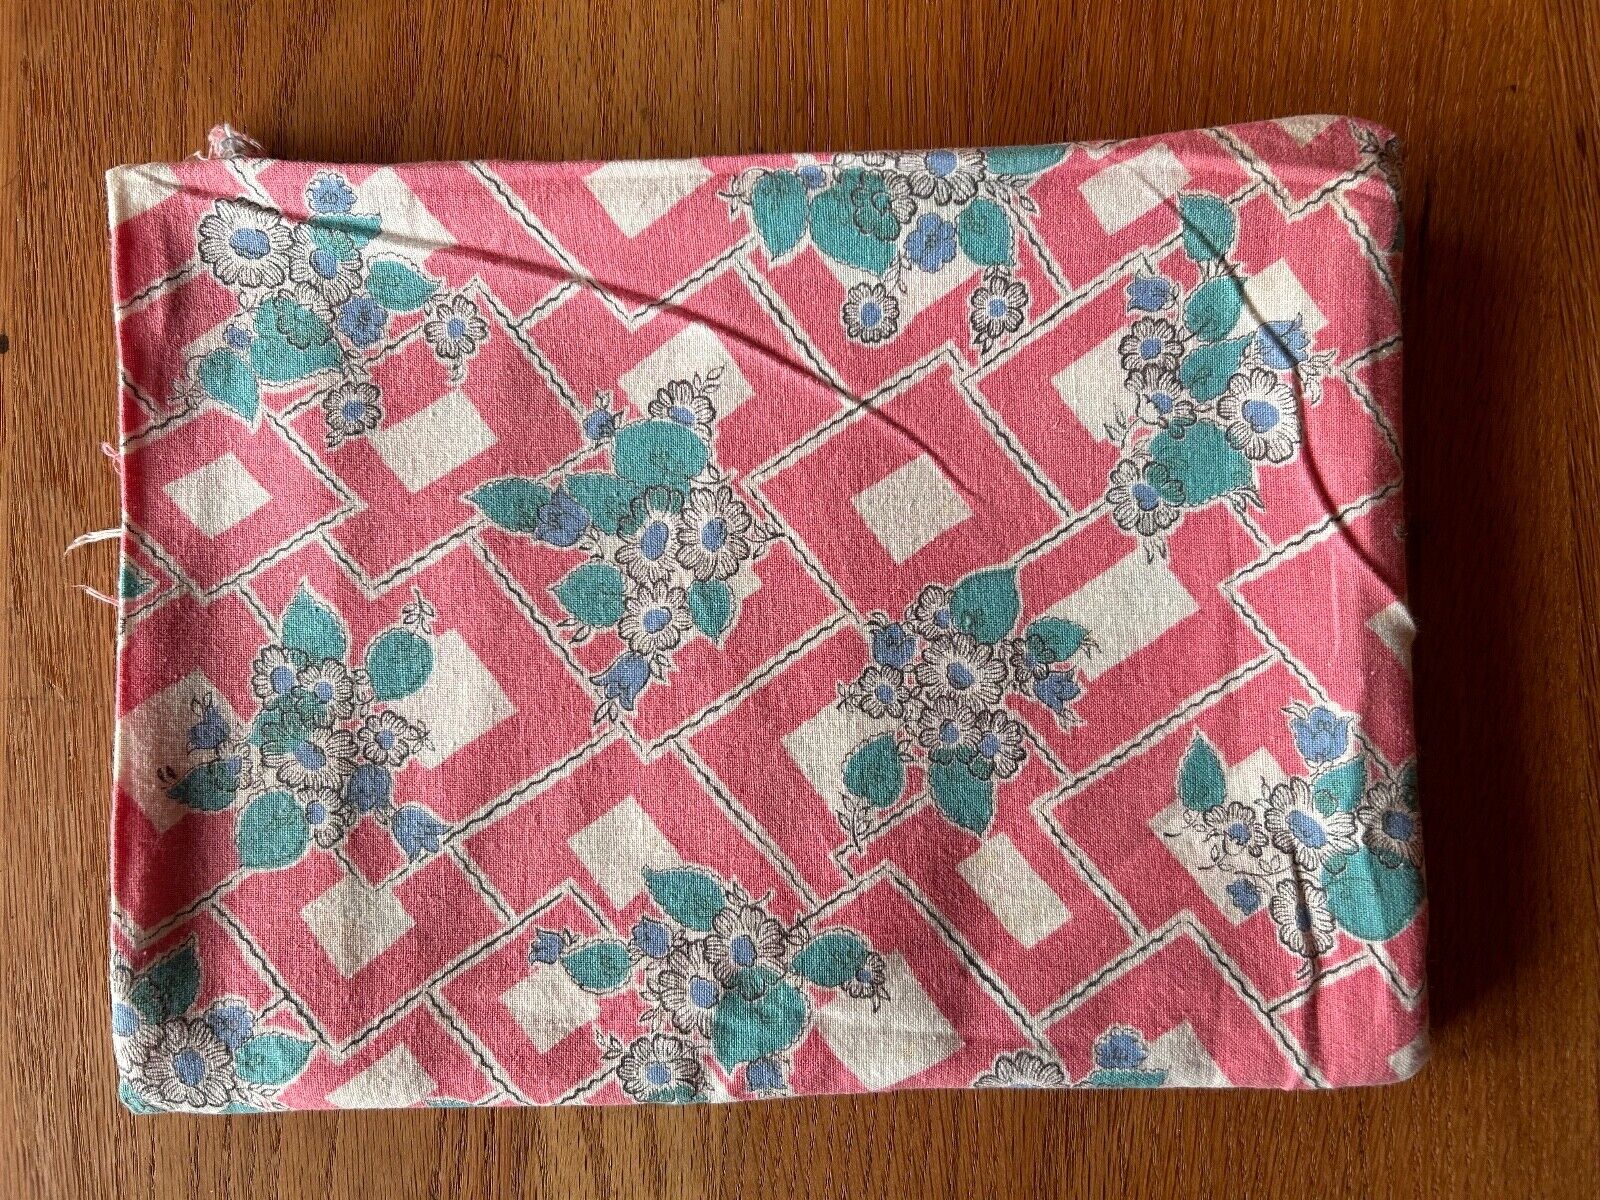 Vintage Cotton Fabric 1940s Pink & Blue Floral 35w x 1yd